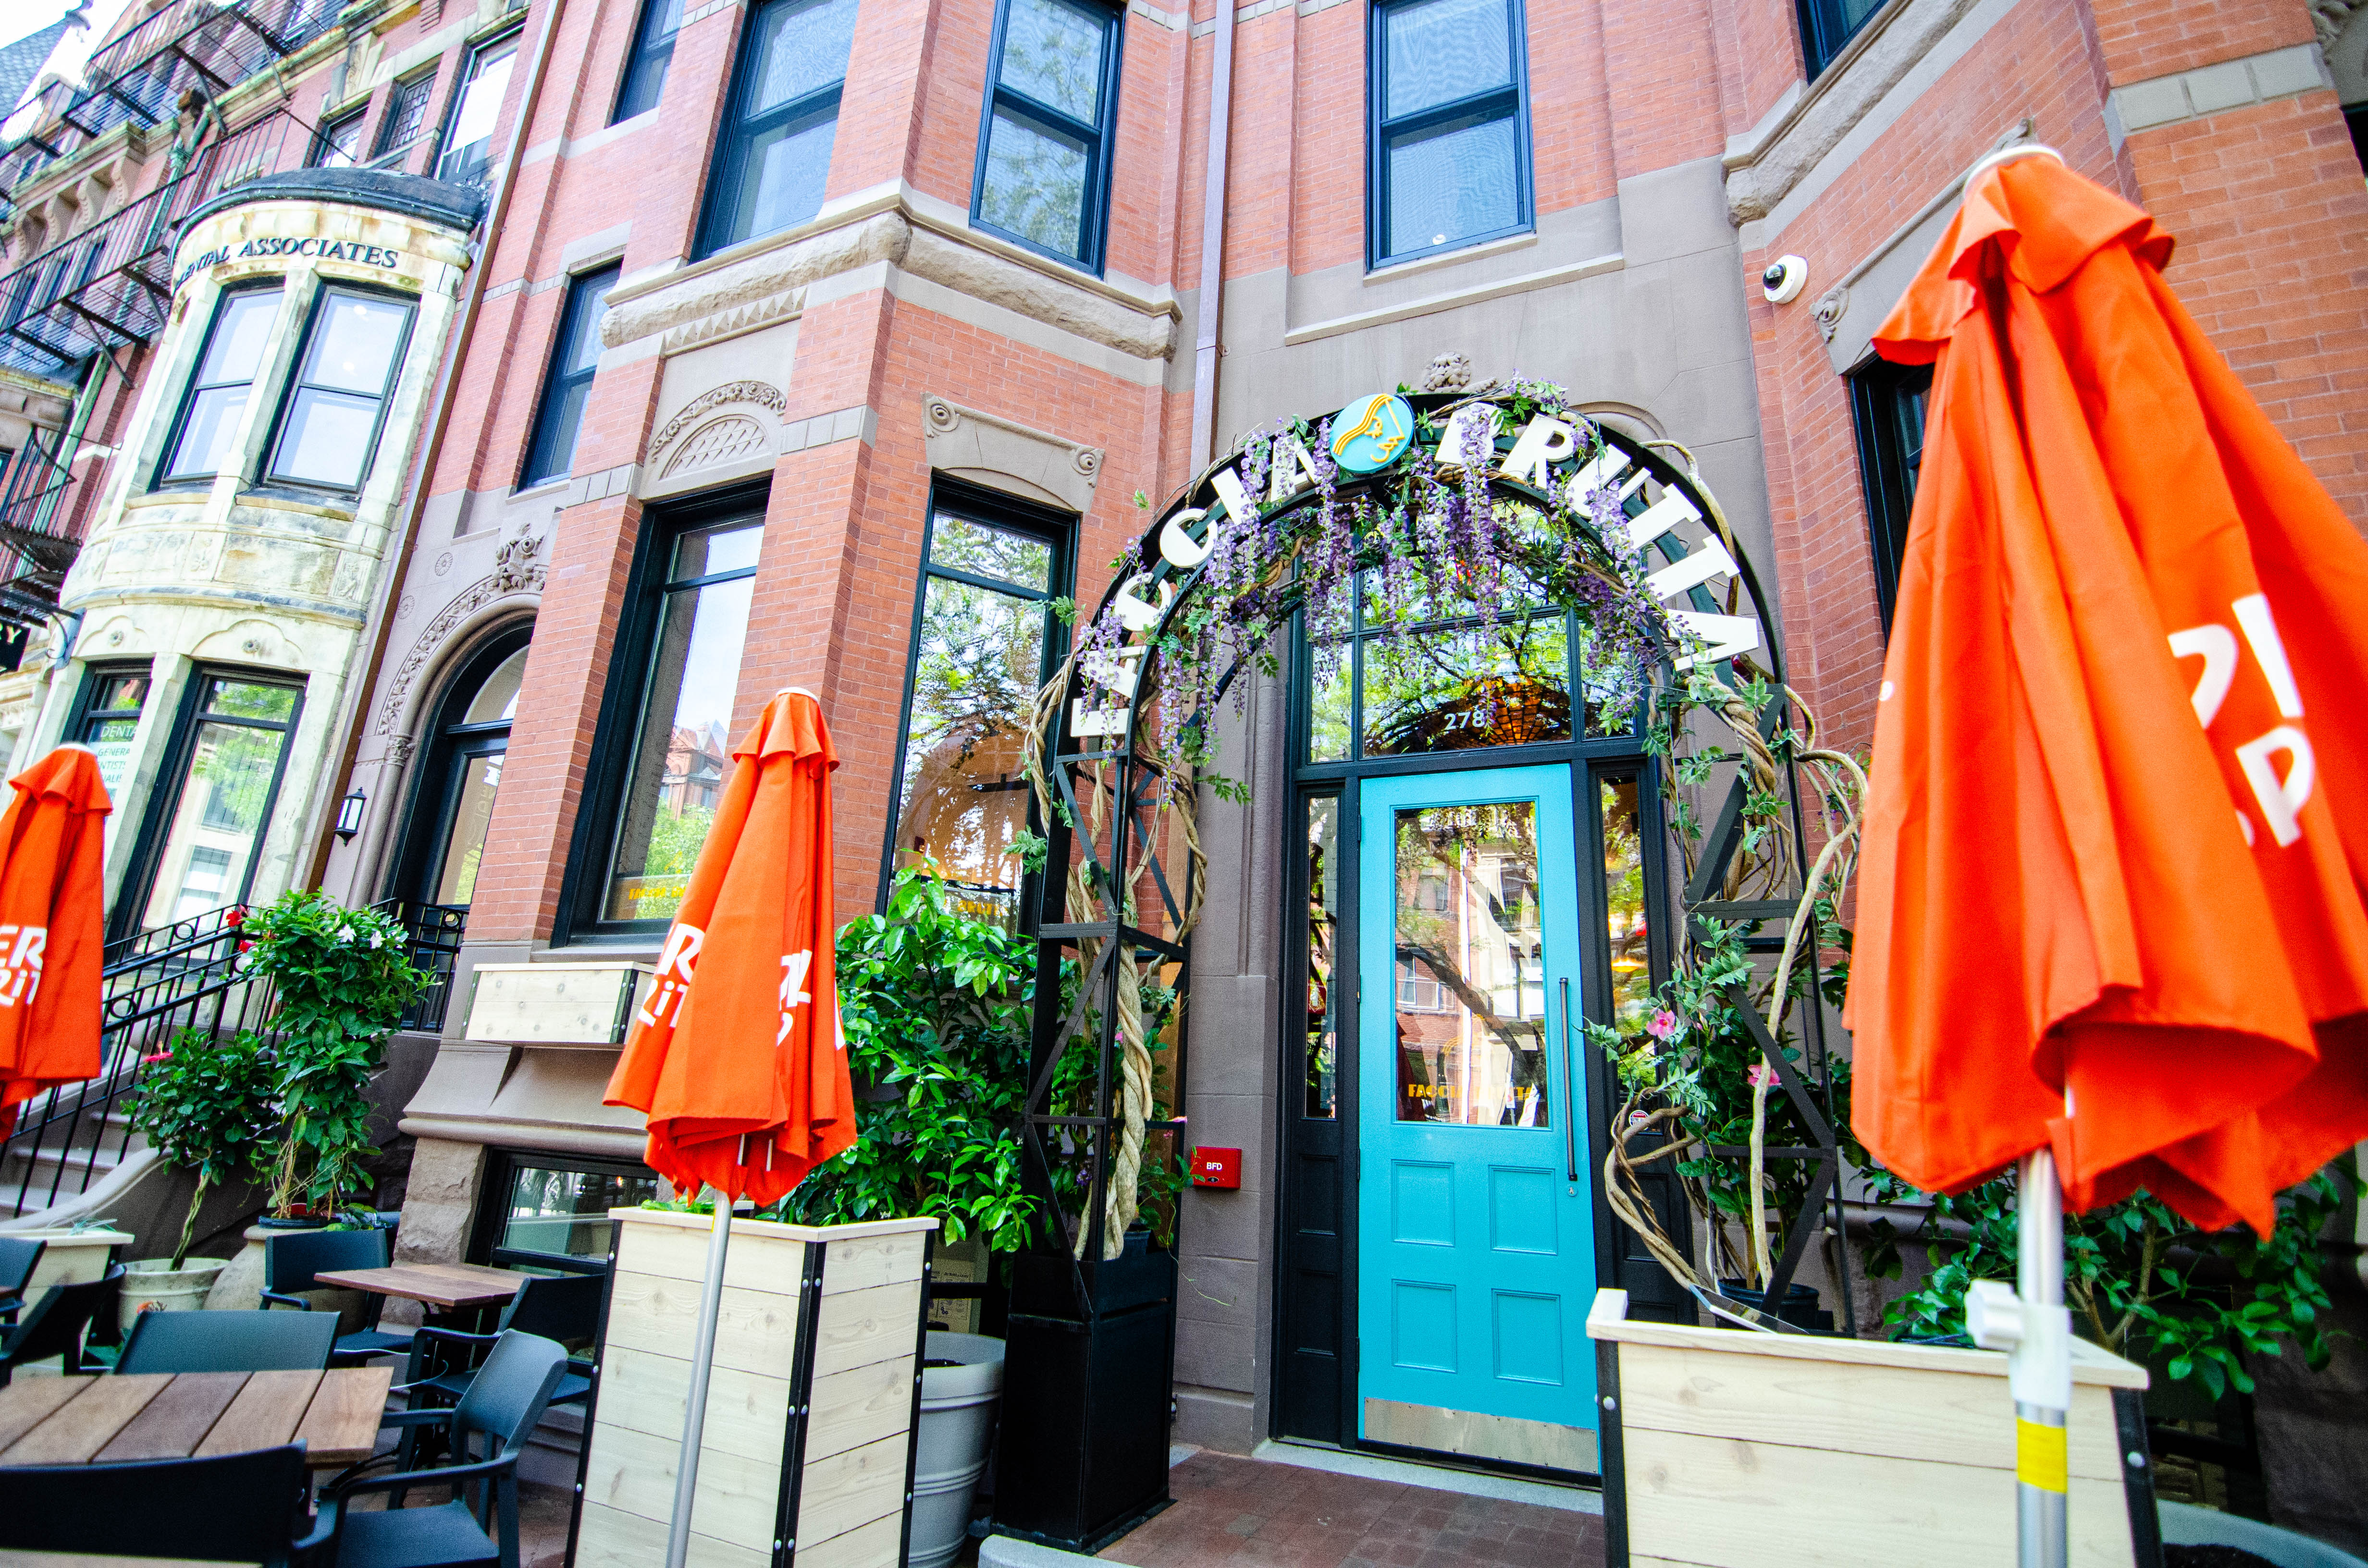 A restaurant exterior in a brick townhouse. A patio out front features wooden tables and chairs, bright orange umbrellas, and a trellis with the restaurant name, Faccia Brutta.